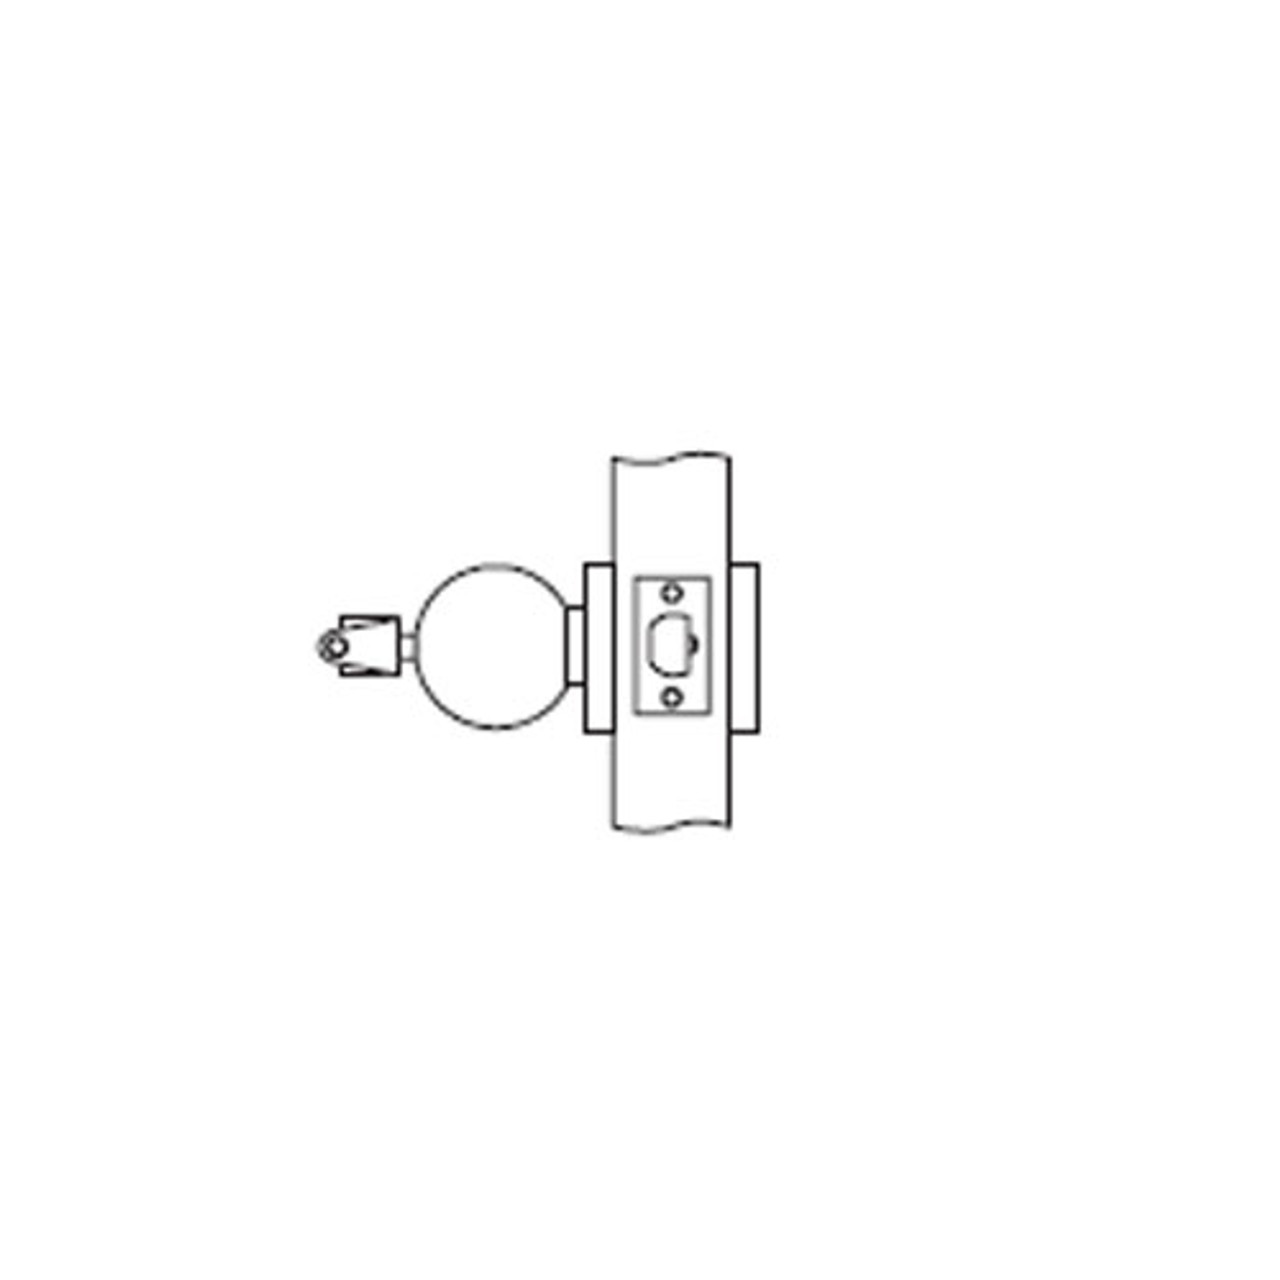 MK18-BD-10B Arrow Lock MK Series Cylindrical Locksets Single Cylinder for Communicating Classroom with BD Knob in Oil Rubbed Bronze